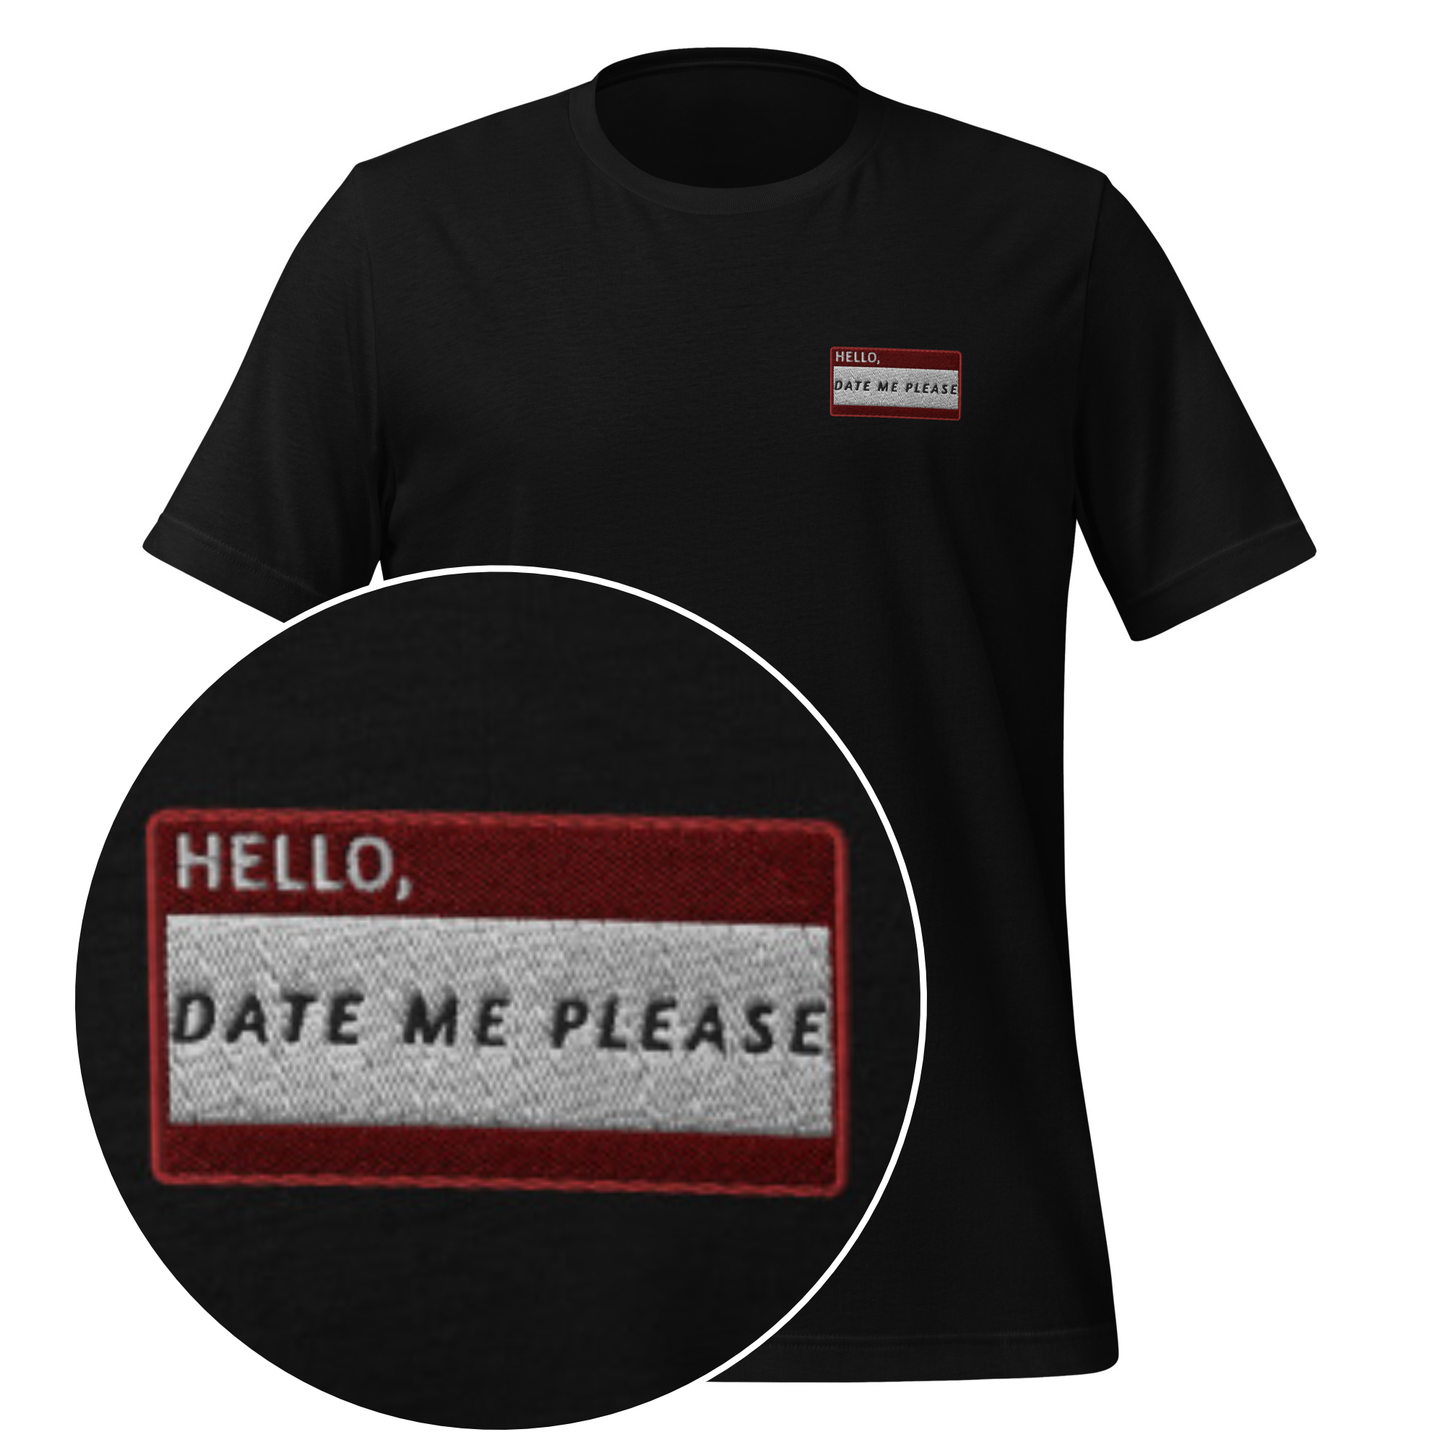 HELLO DATE ME PLEASE - Name Tag T-Shirt